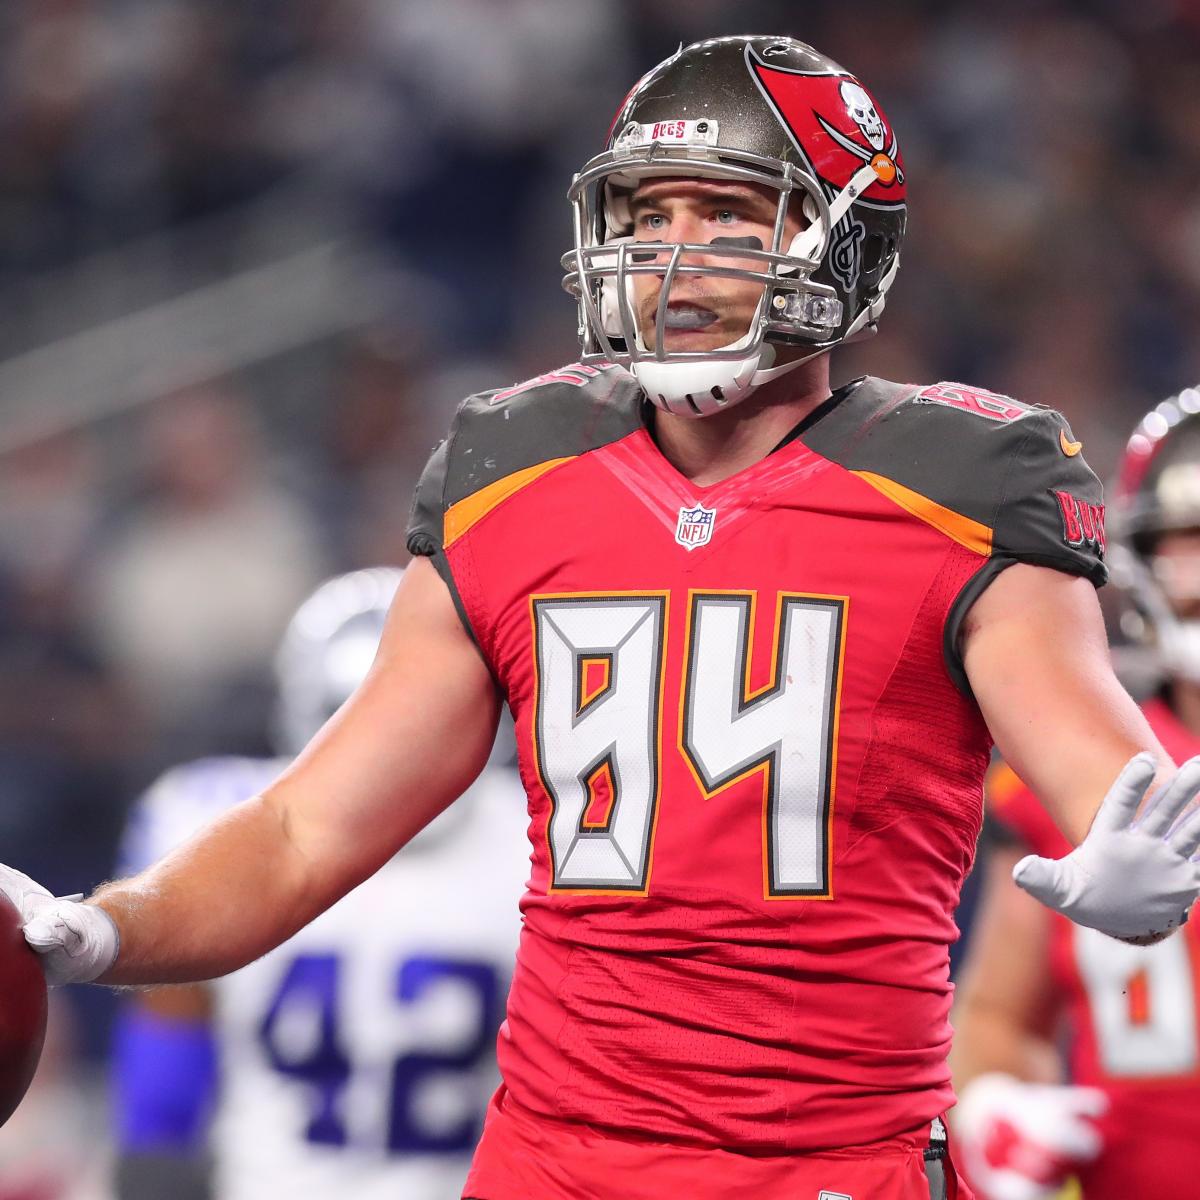 Cameron Brate Ties Buccaneers' Tight End Receiving Touchdowns Record